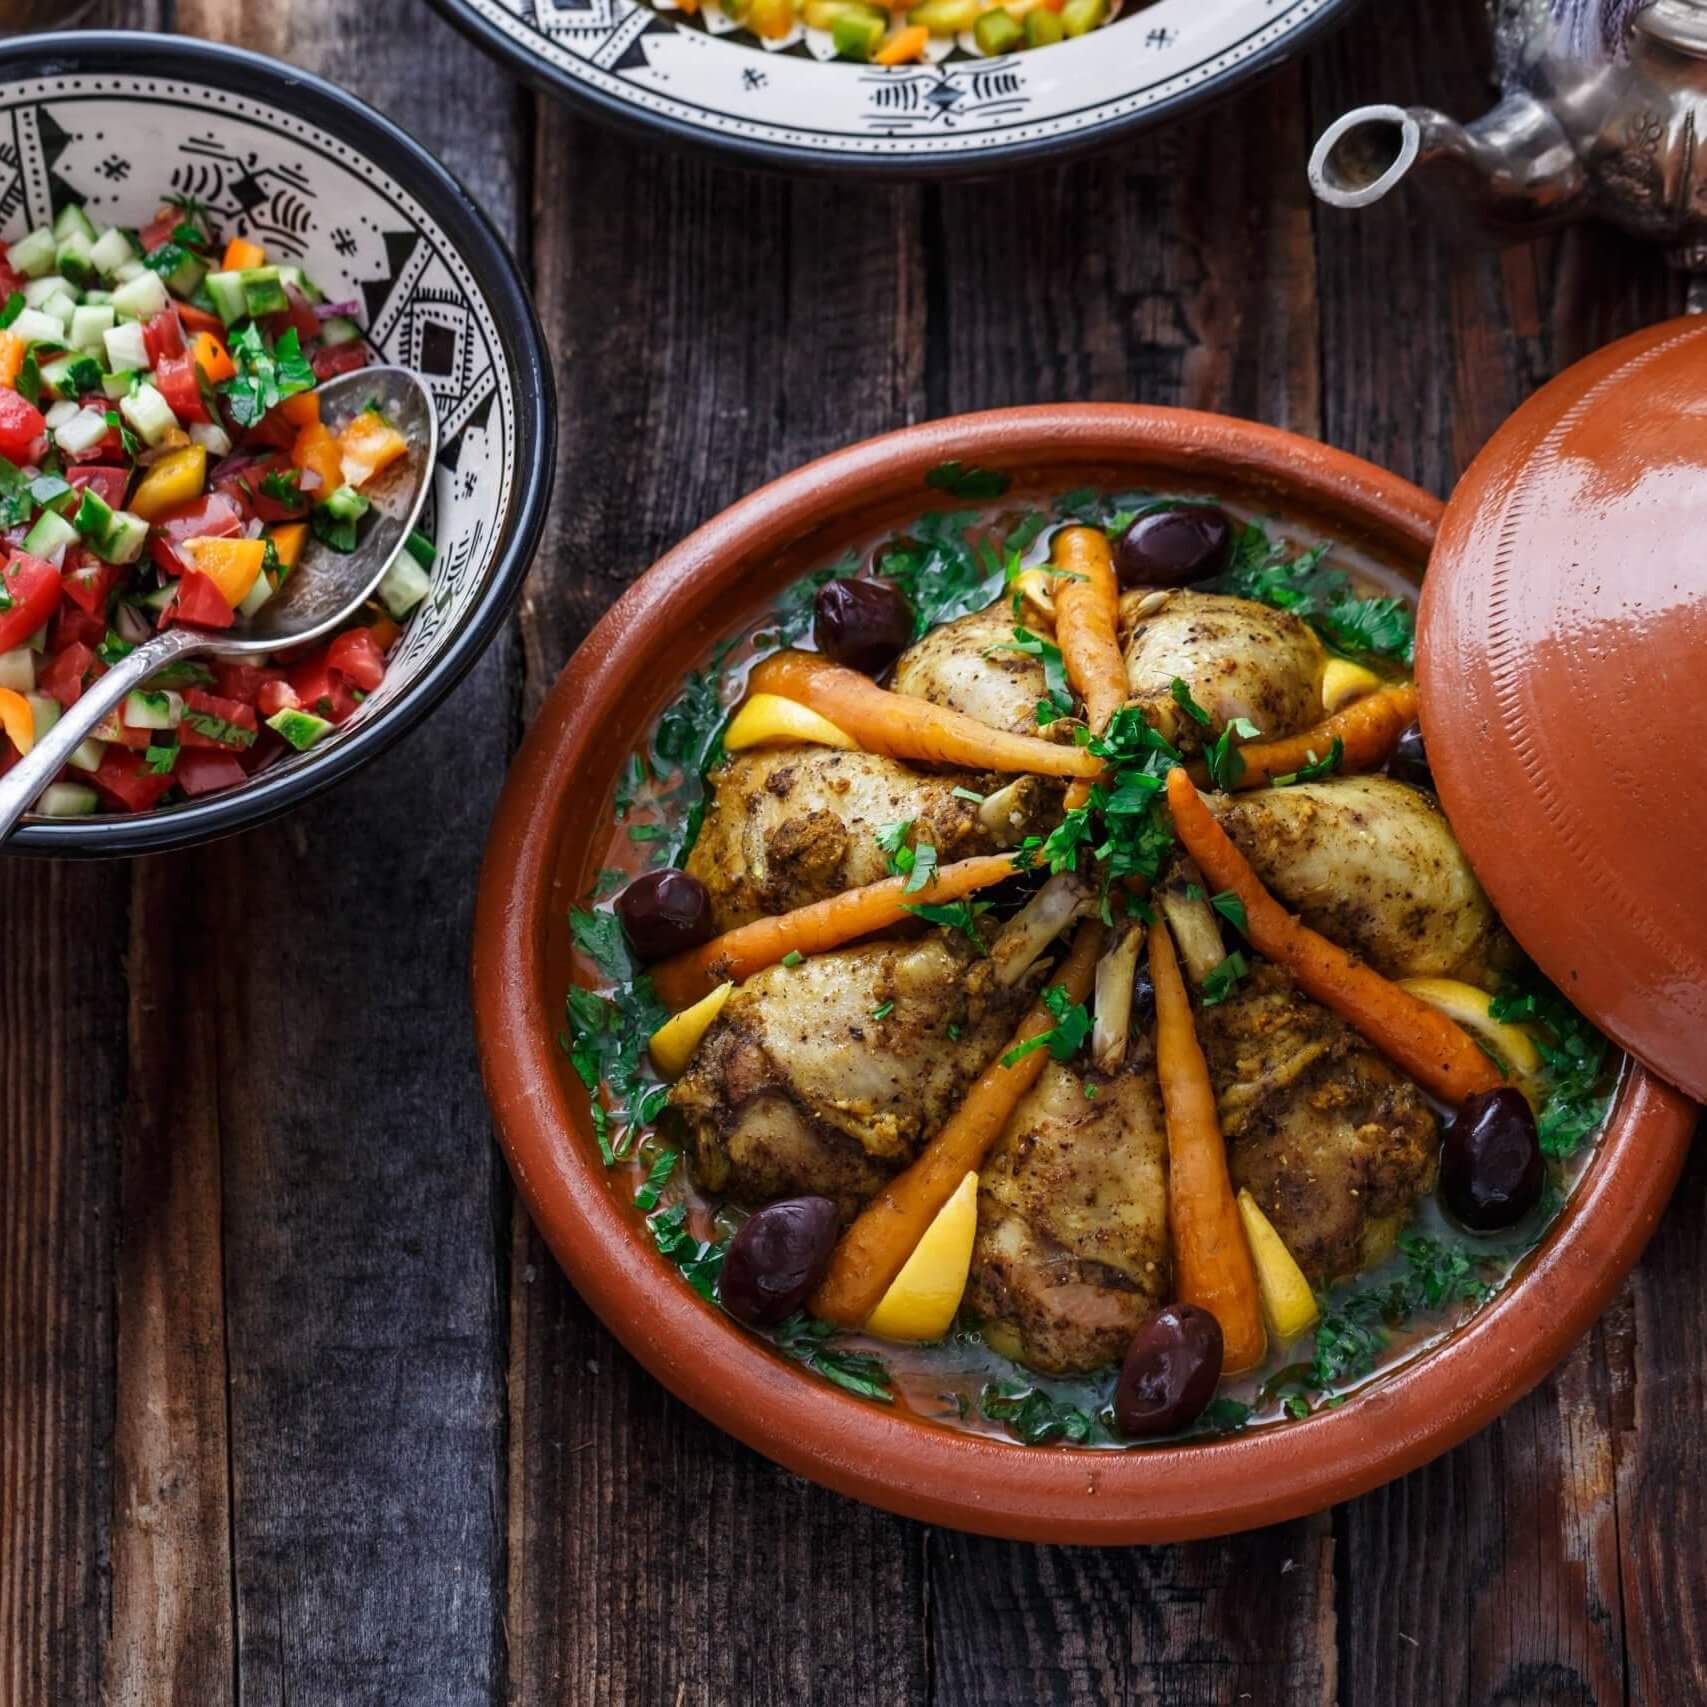 Slow,Cooked,Chicken,With,Carrots,,Morrocan,Tajine,,Rustic,Style